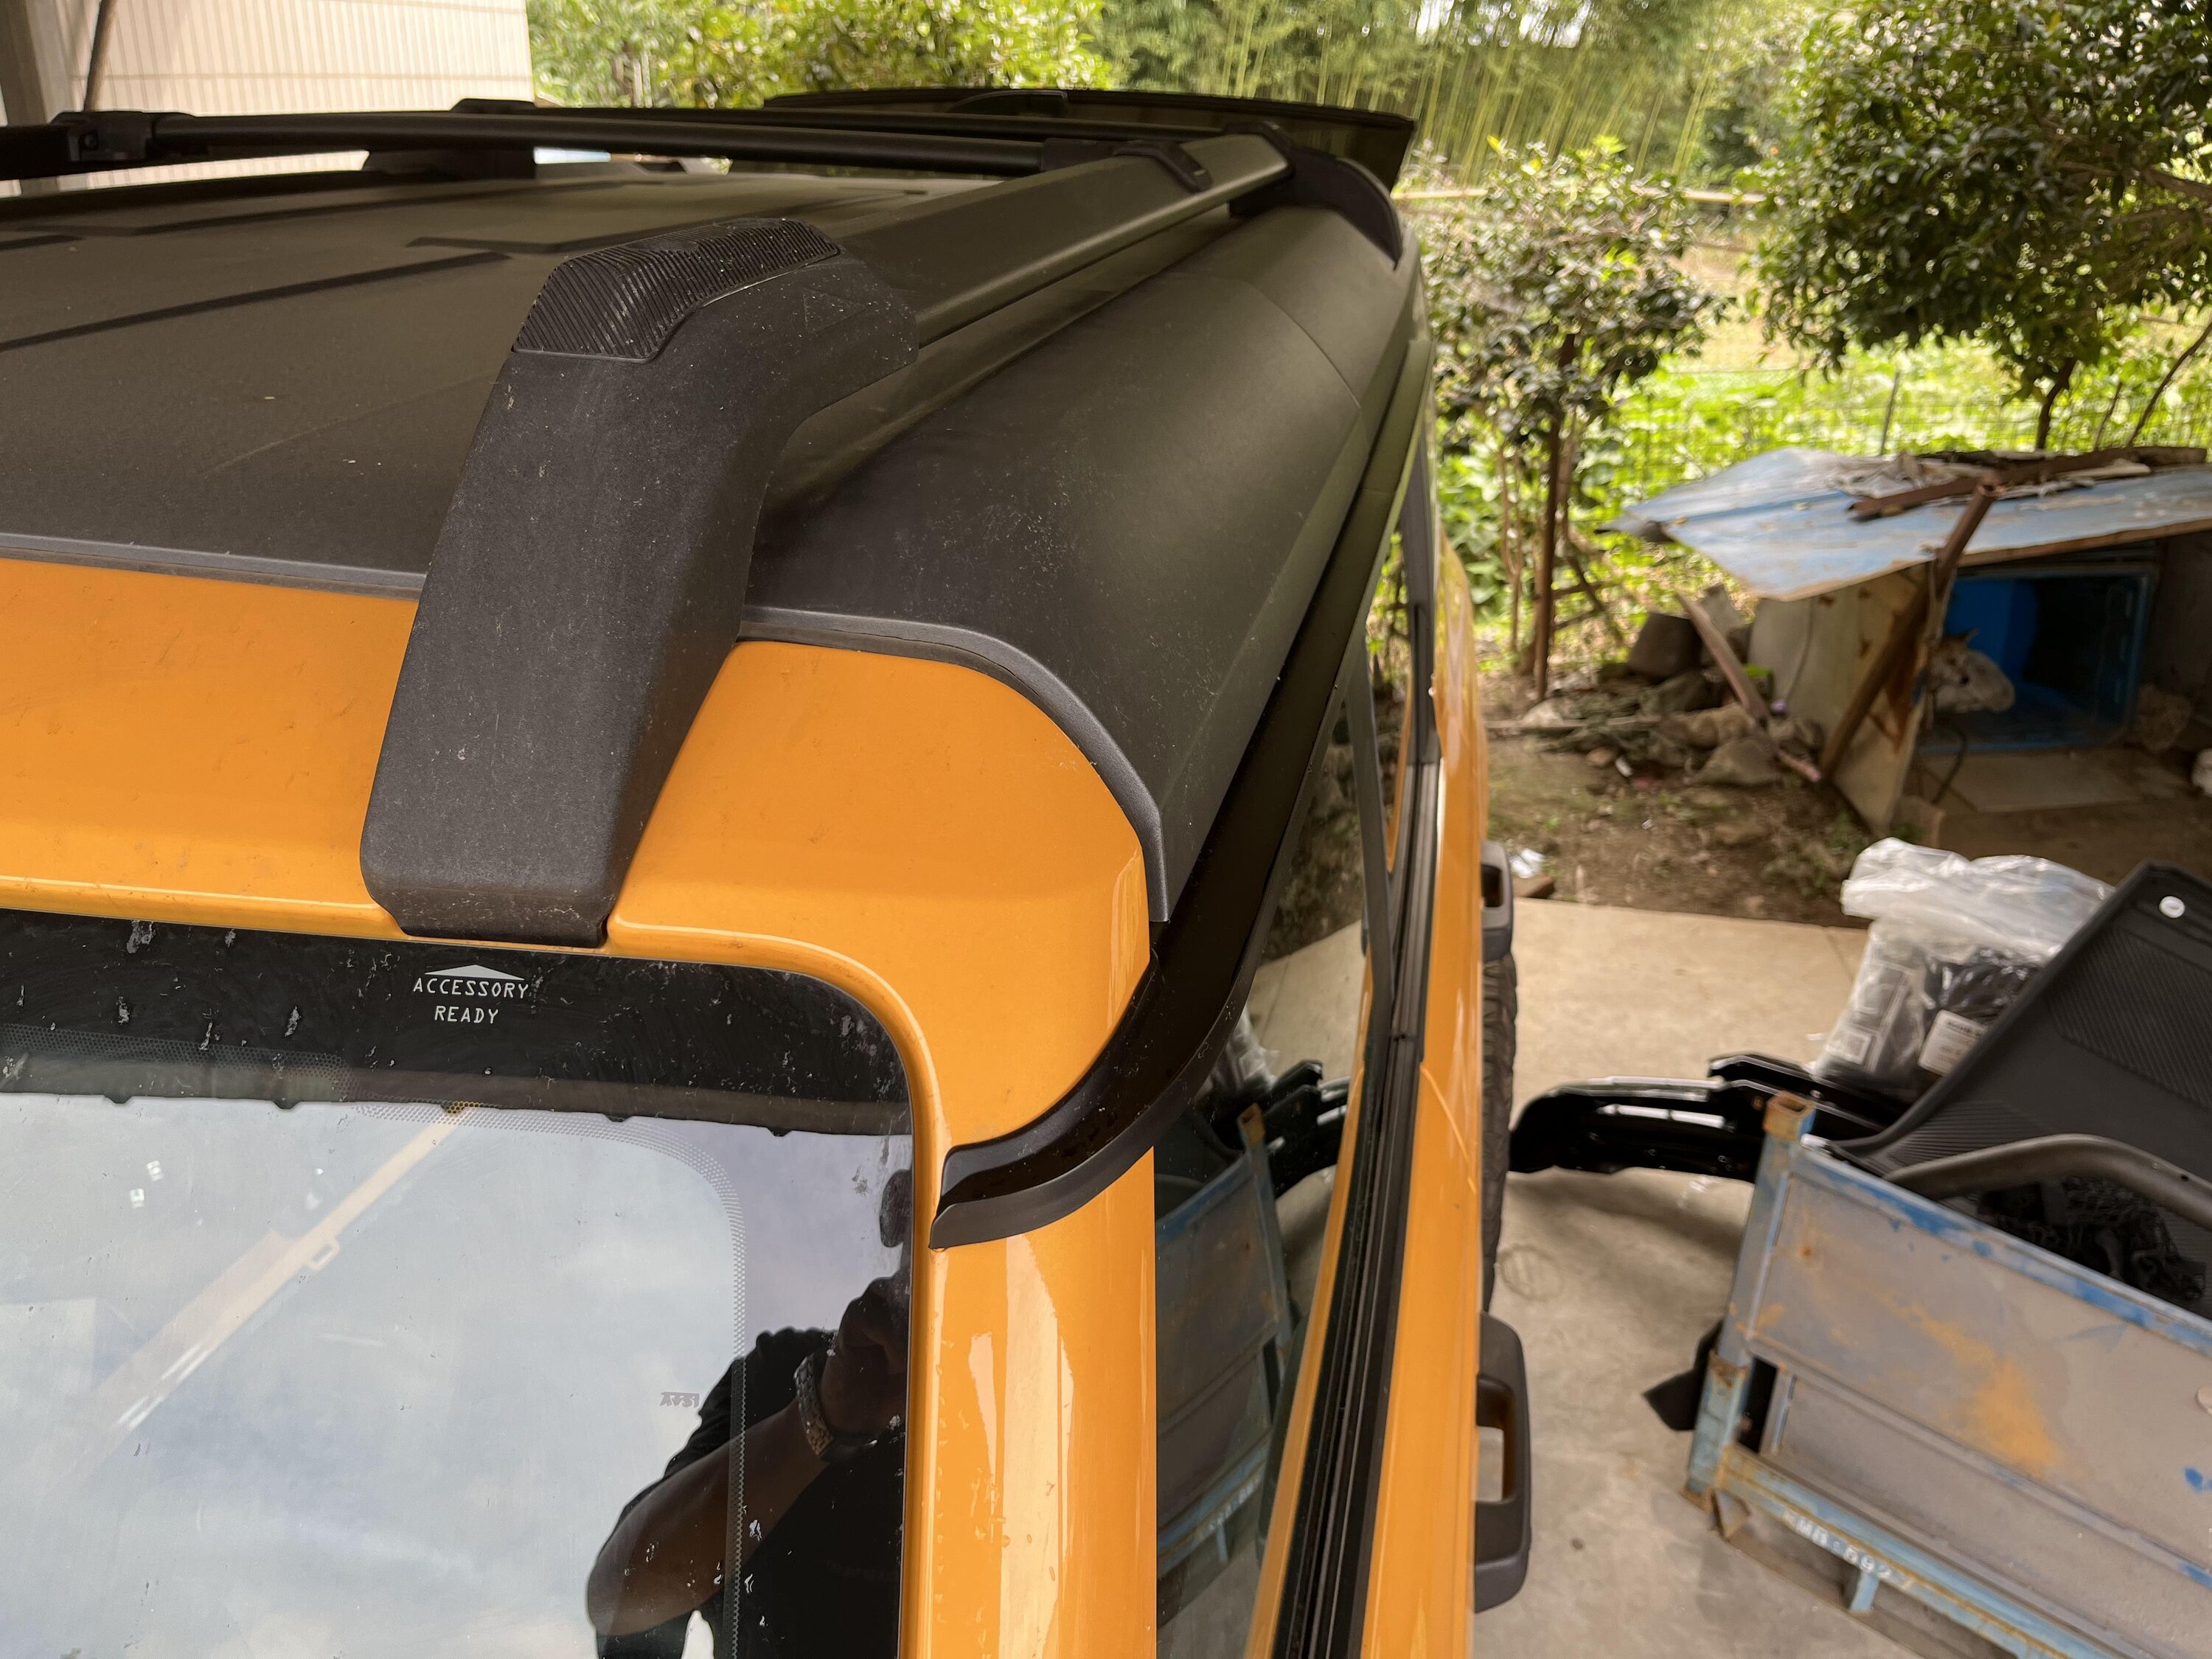 Ford Bronco Mabett Rain Guards Available Now! 2.JPG